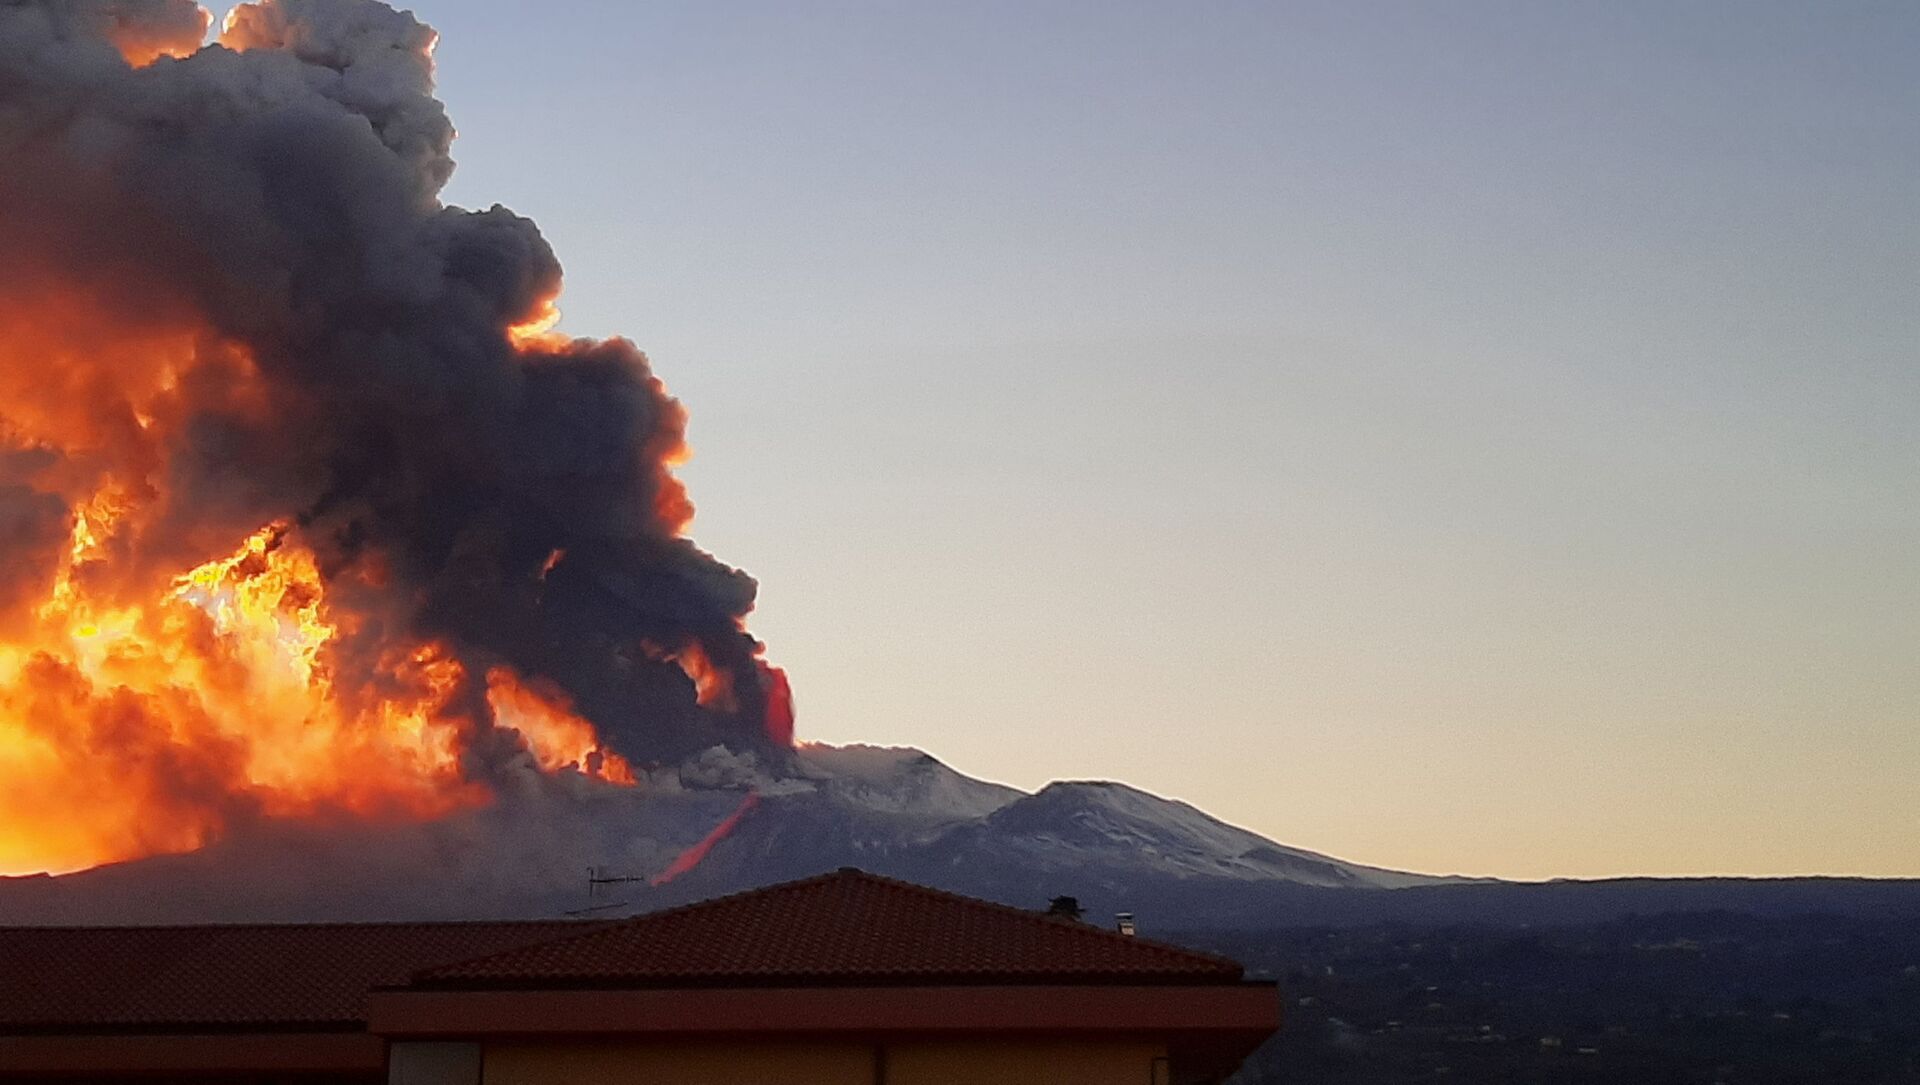 Ash spews from Mount Etna as Europe's most active volcano erupts as seen from Riposto, Italy, February 16, 2021 in this image taken from social media. - Sputnik International, 1920, 19.02.2021